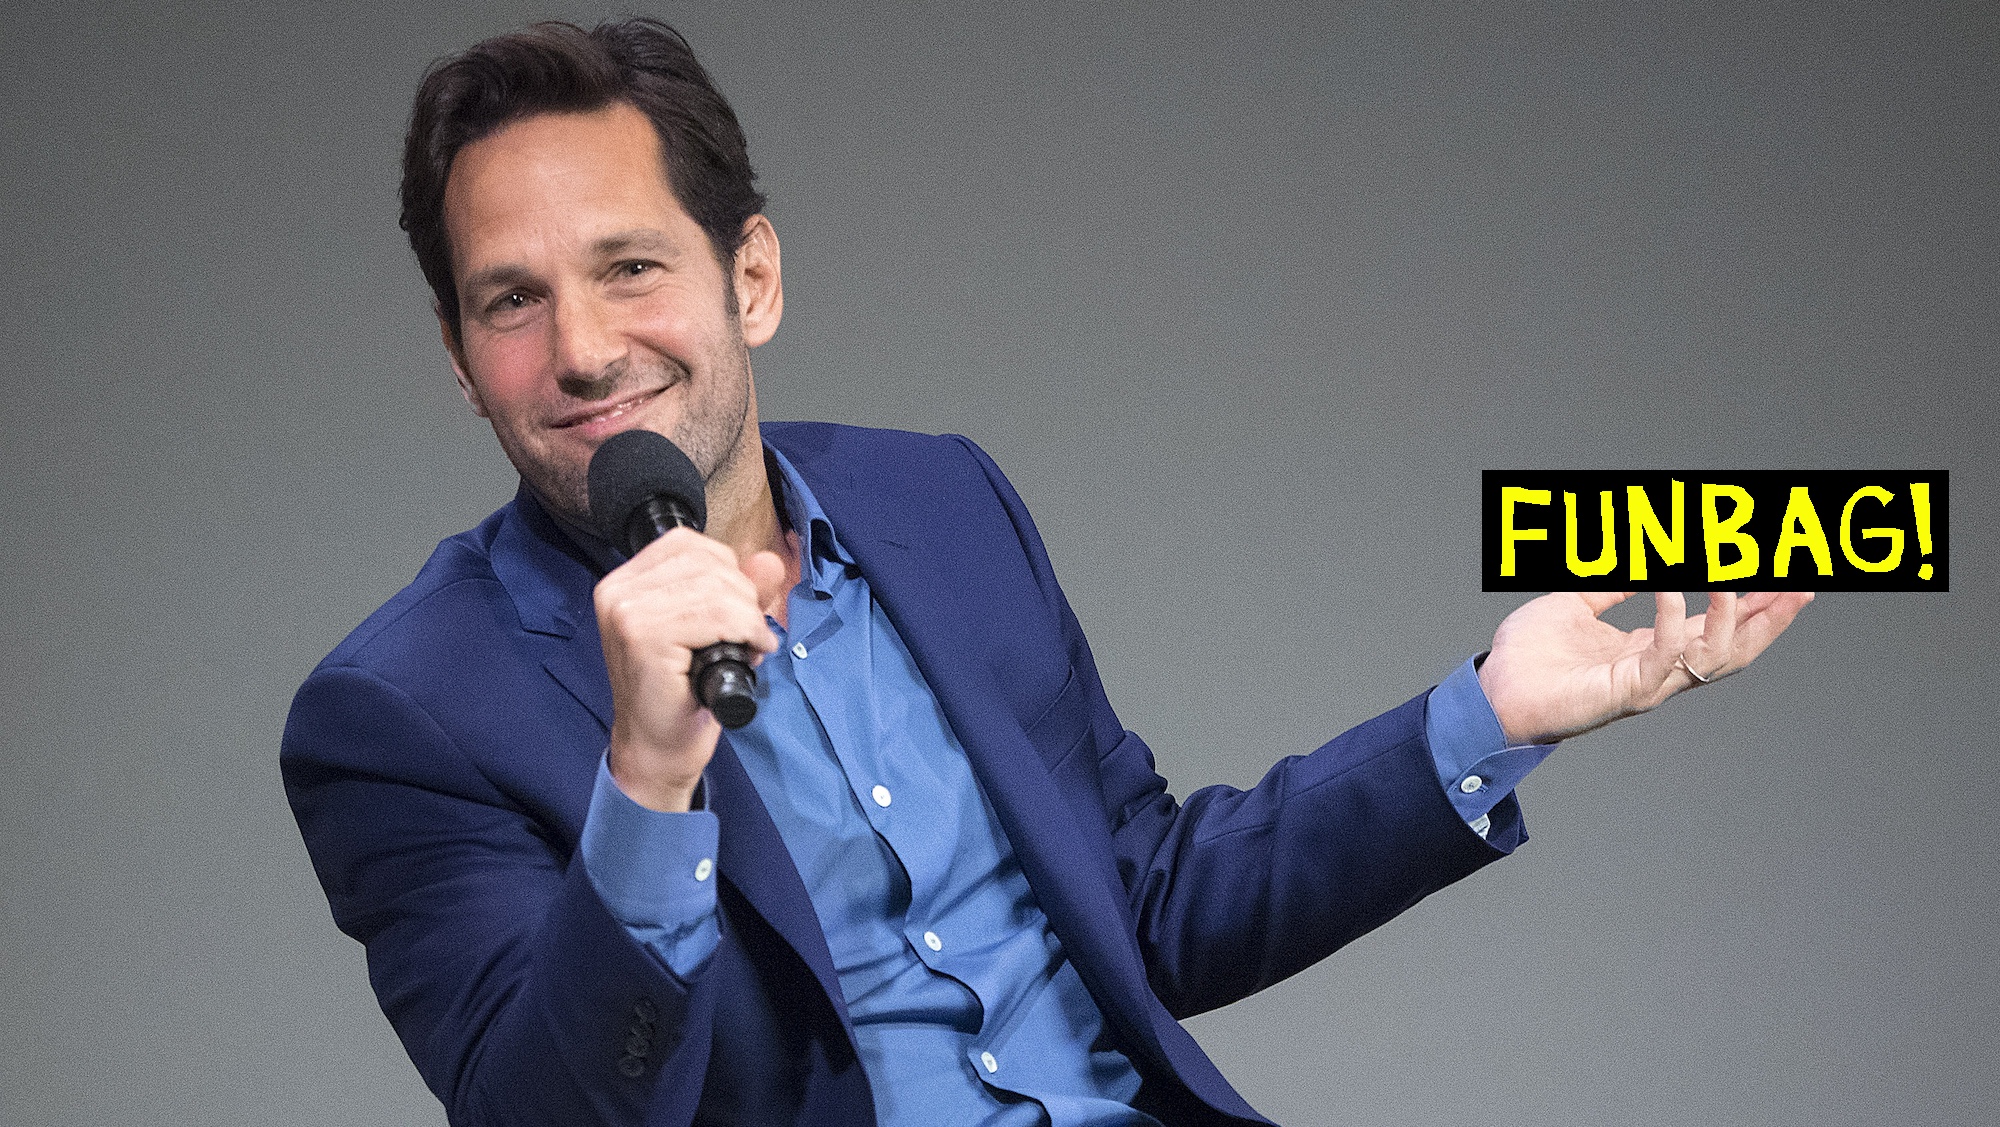 NEW YORK, NY - JULY 16: Actor Paul Rudd speaks about his latest movie "Ant Man" at the Apple Store Soho on July 16, 2015 in New York City. (Photo by Debra L Rothenberg/FilmMagic)